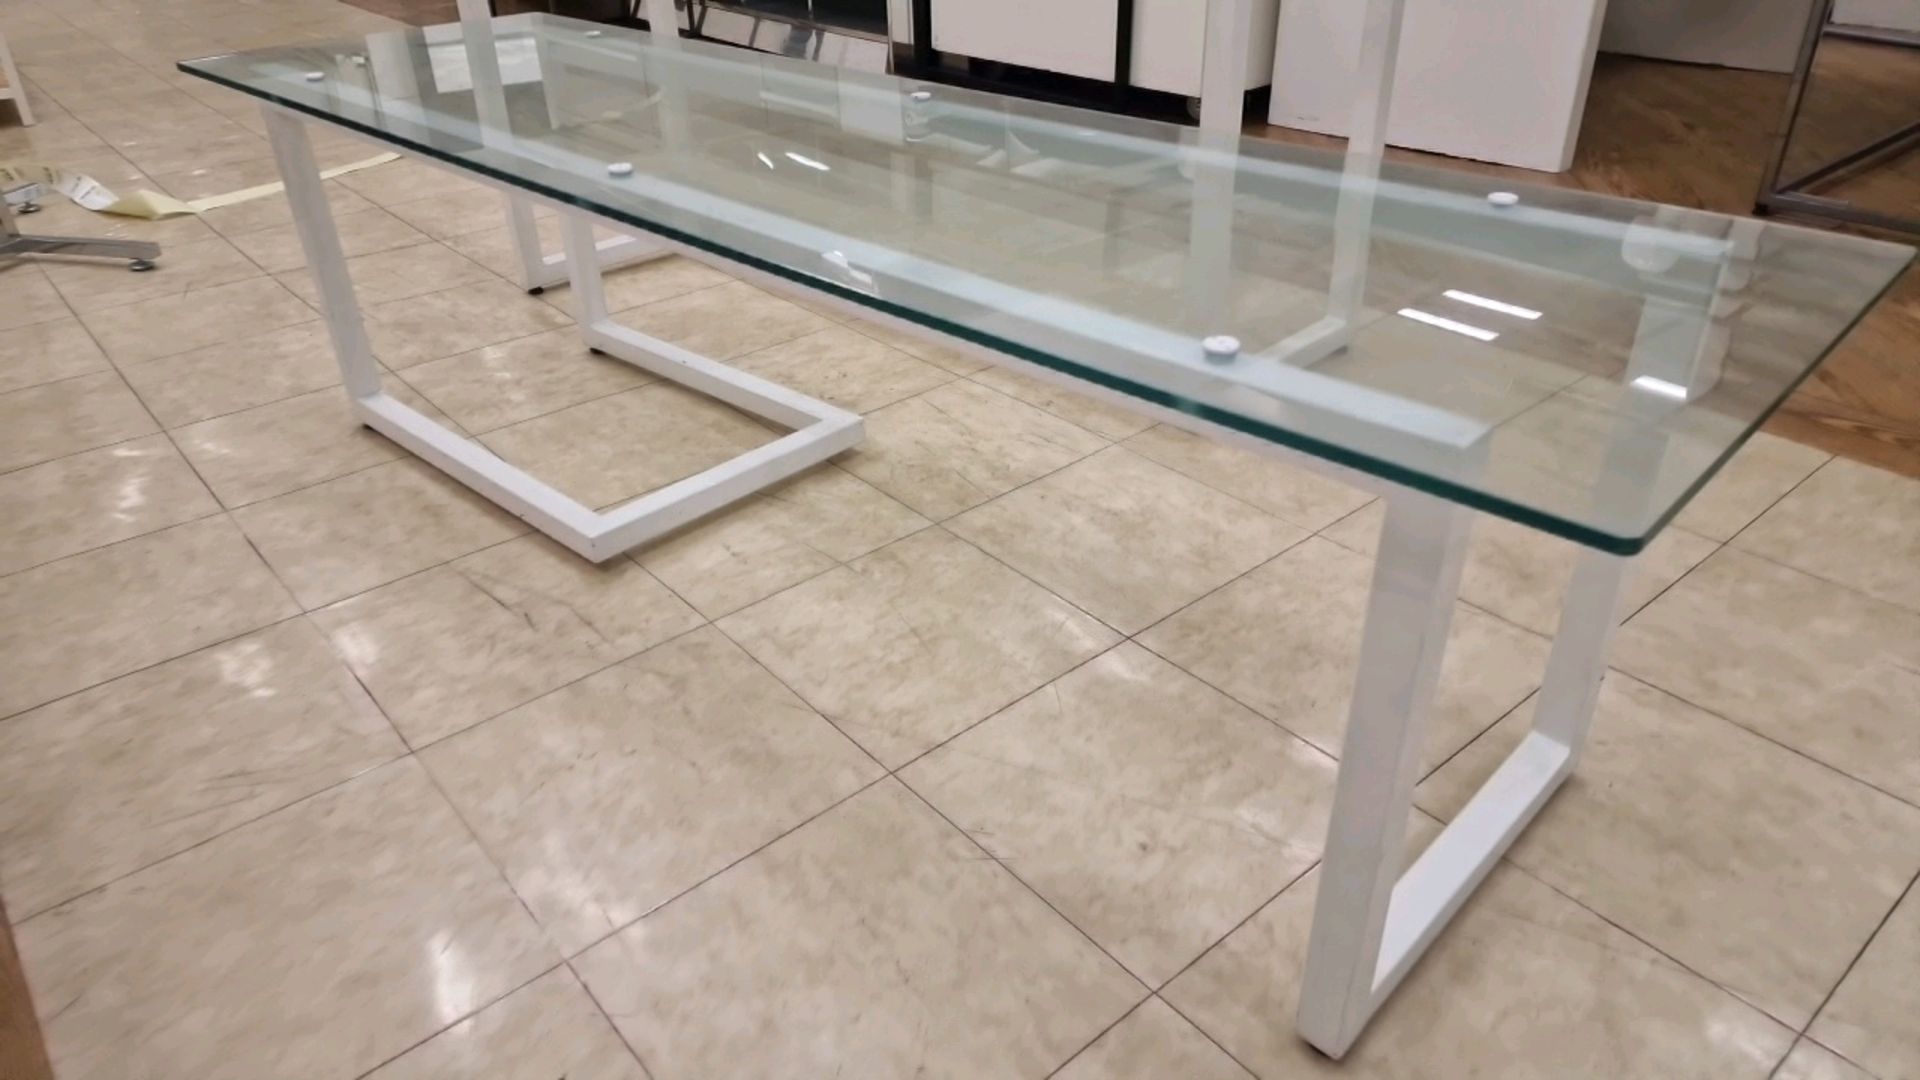 Set of Display Tables - Image 4 of 5